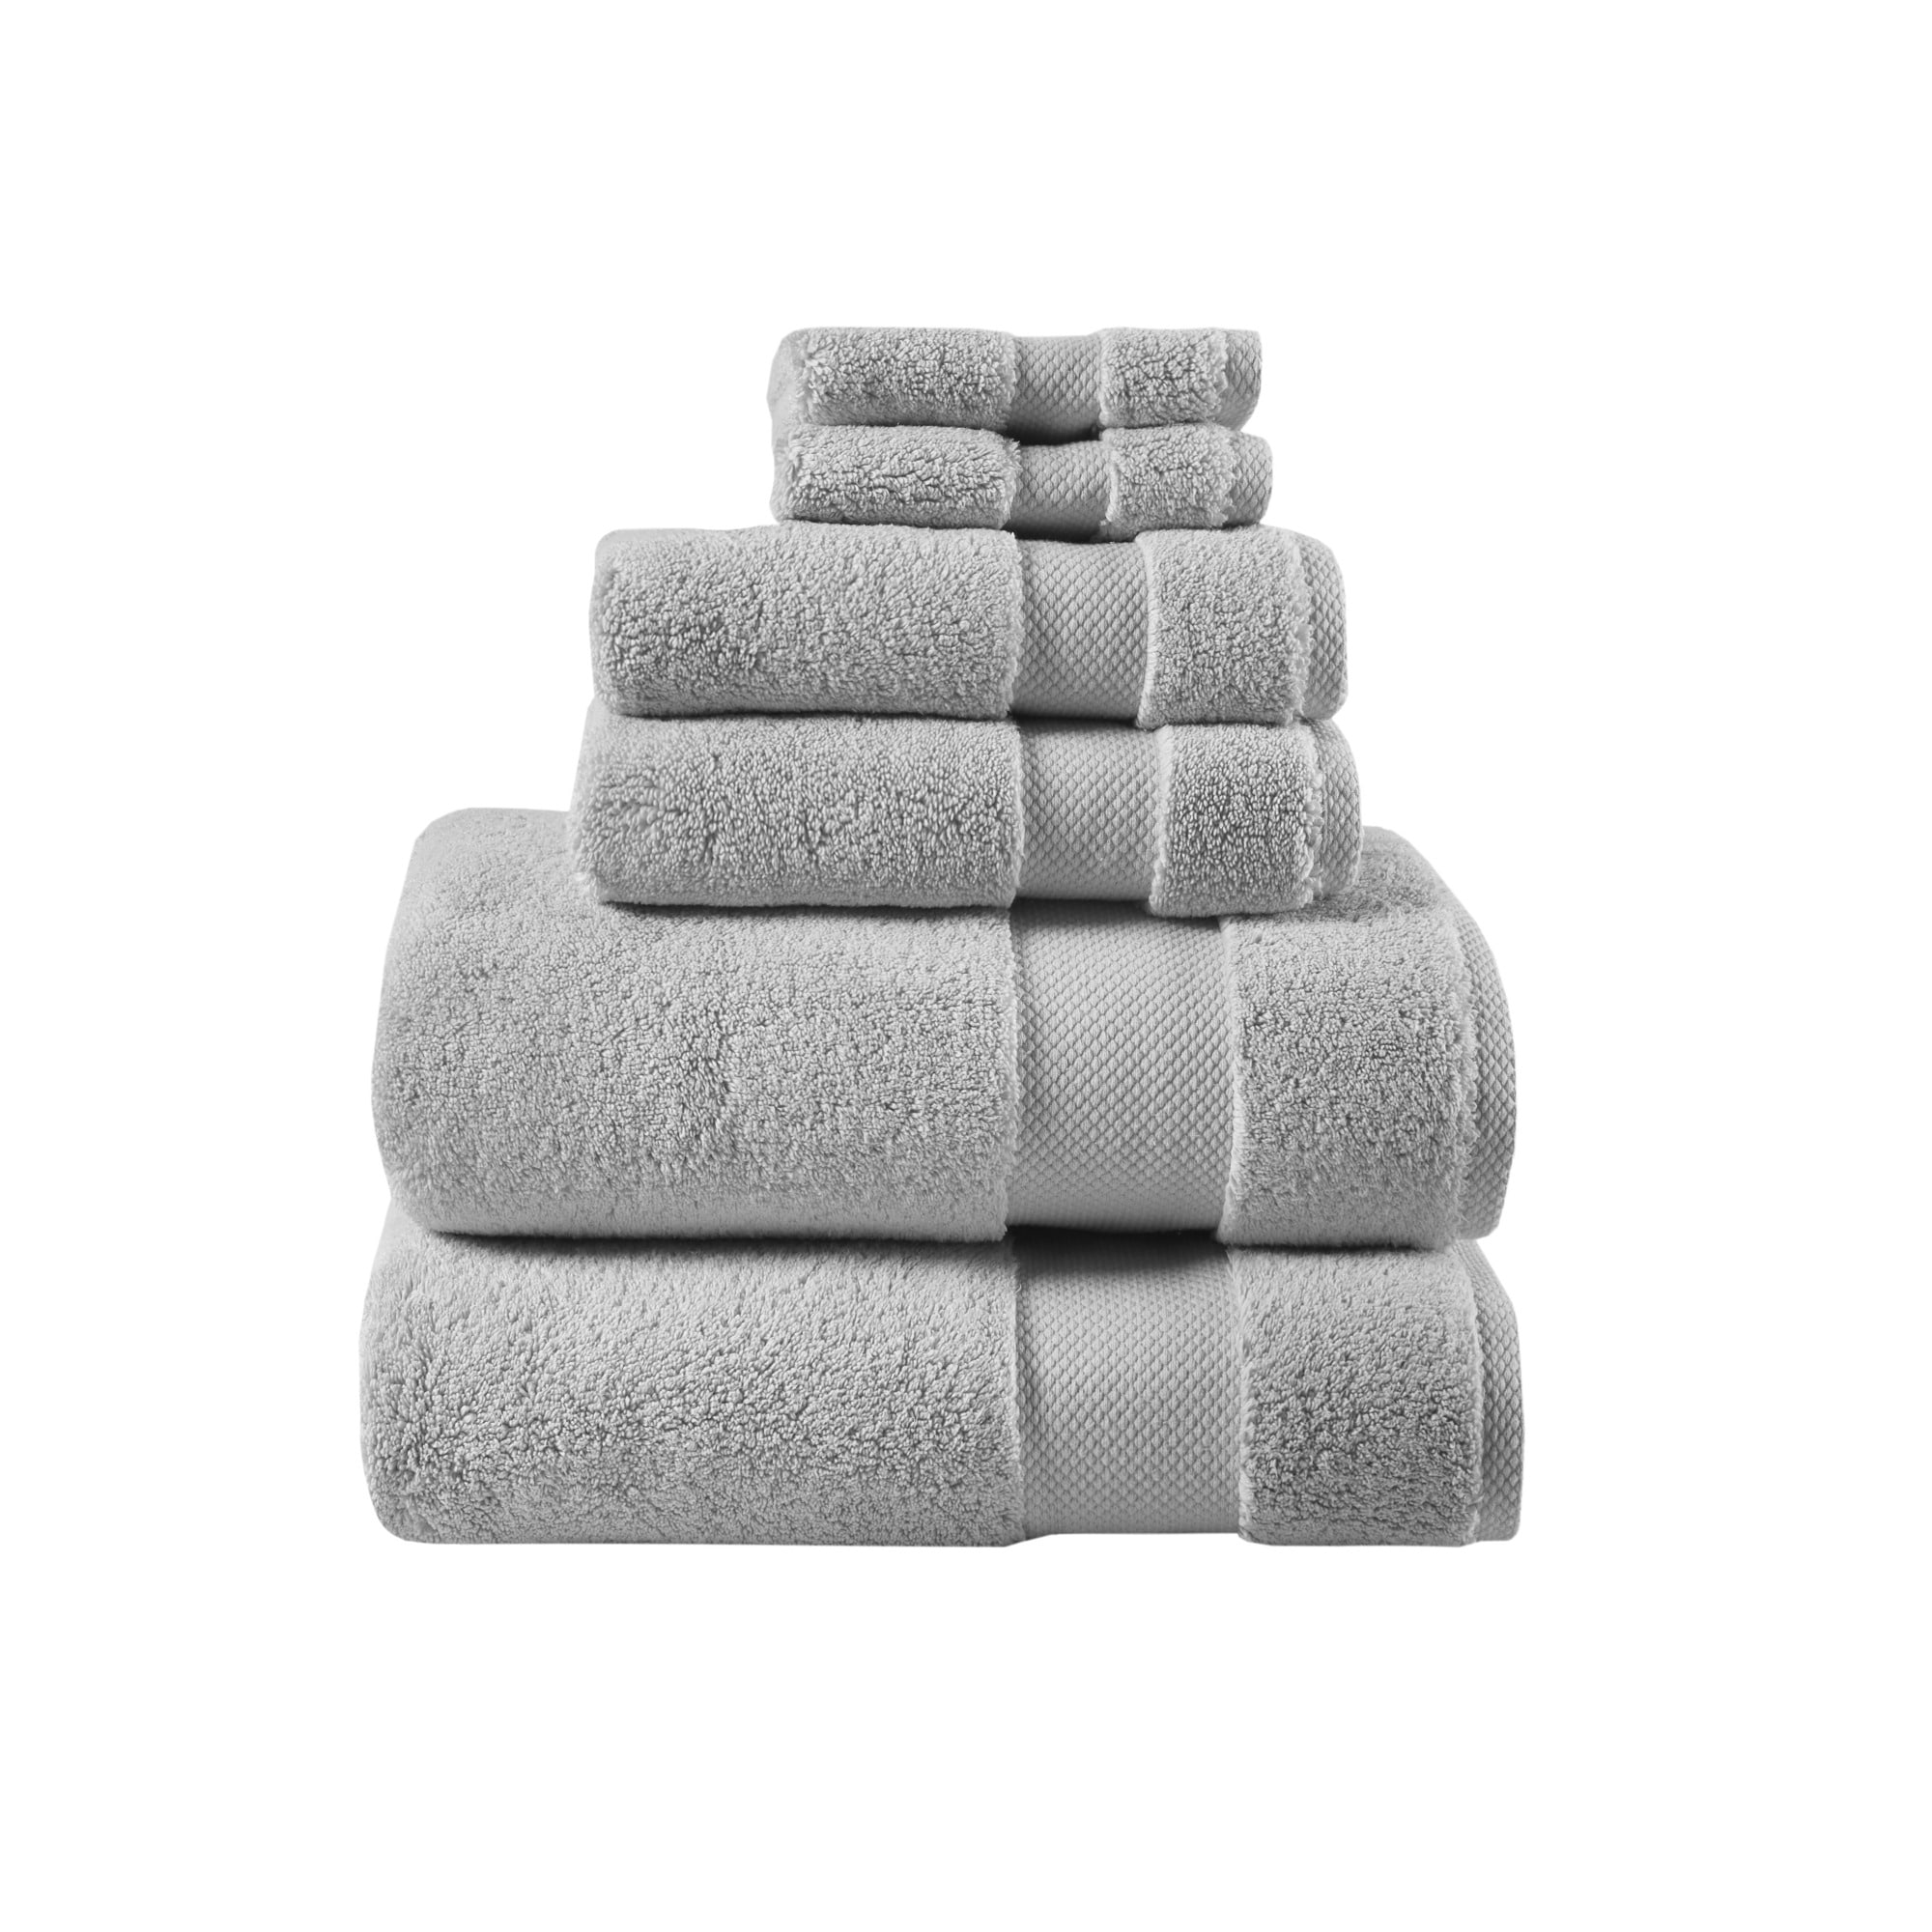 SussexHome Hotel-Quality Large Bath Towel - Ultra-Absorbent 100% Natural  Cotton Bath Sheet Towel for Bathroom - 40 x 80 Inches Solid Design Plush Thick  Luxury Bath Towel 